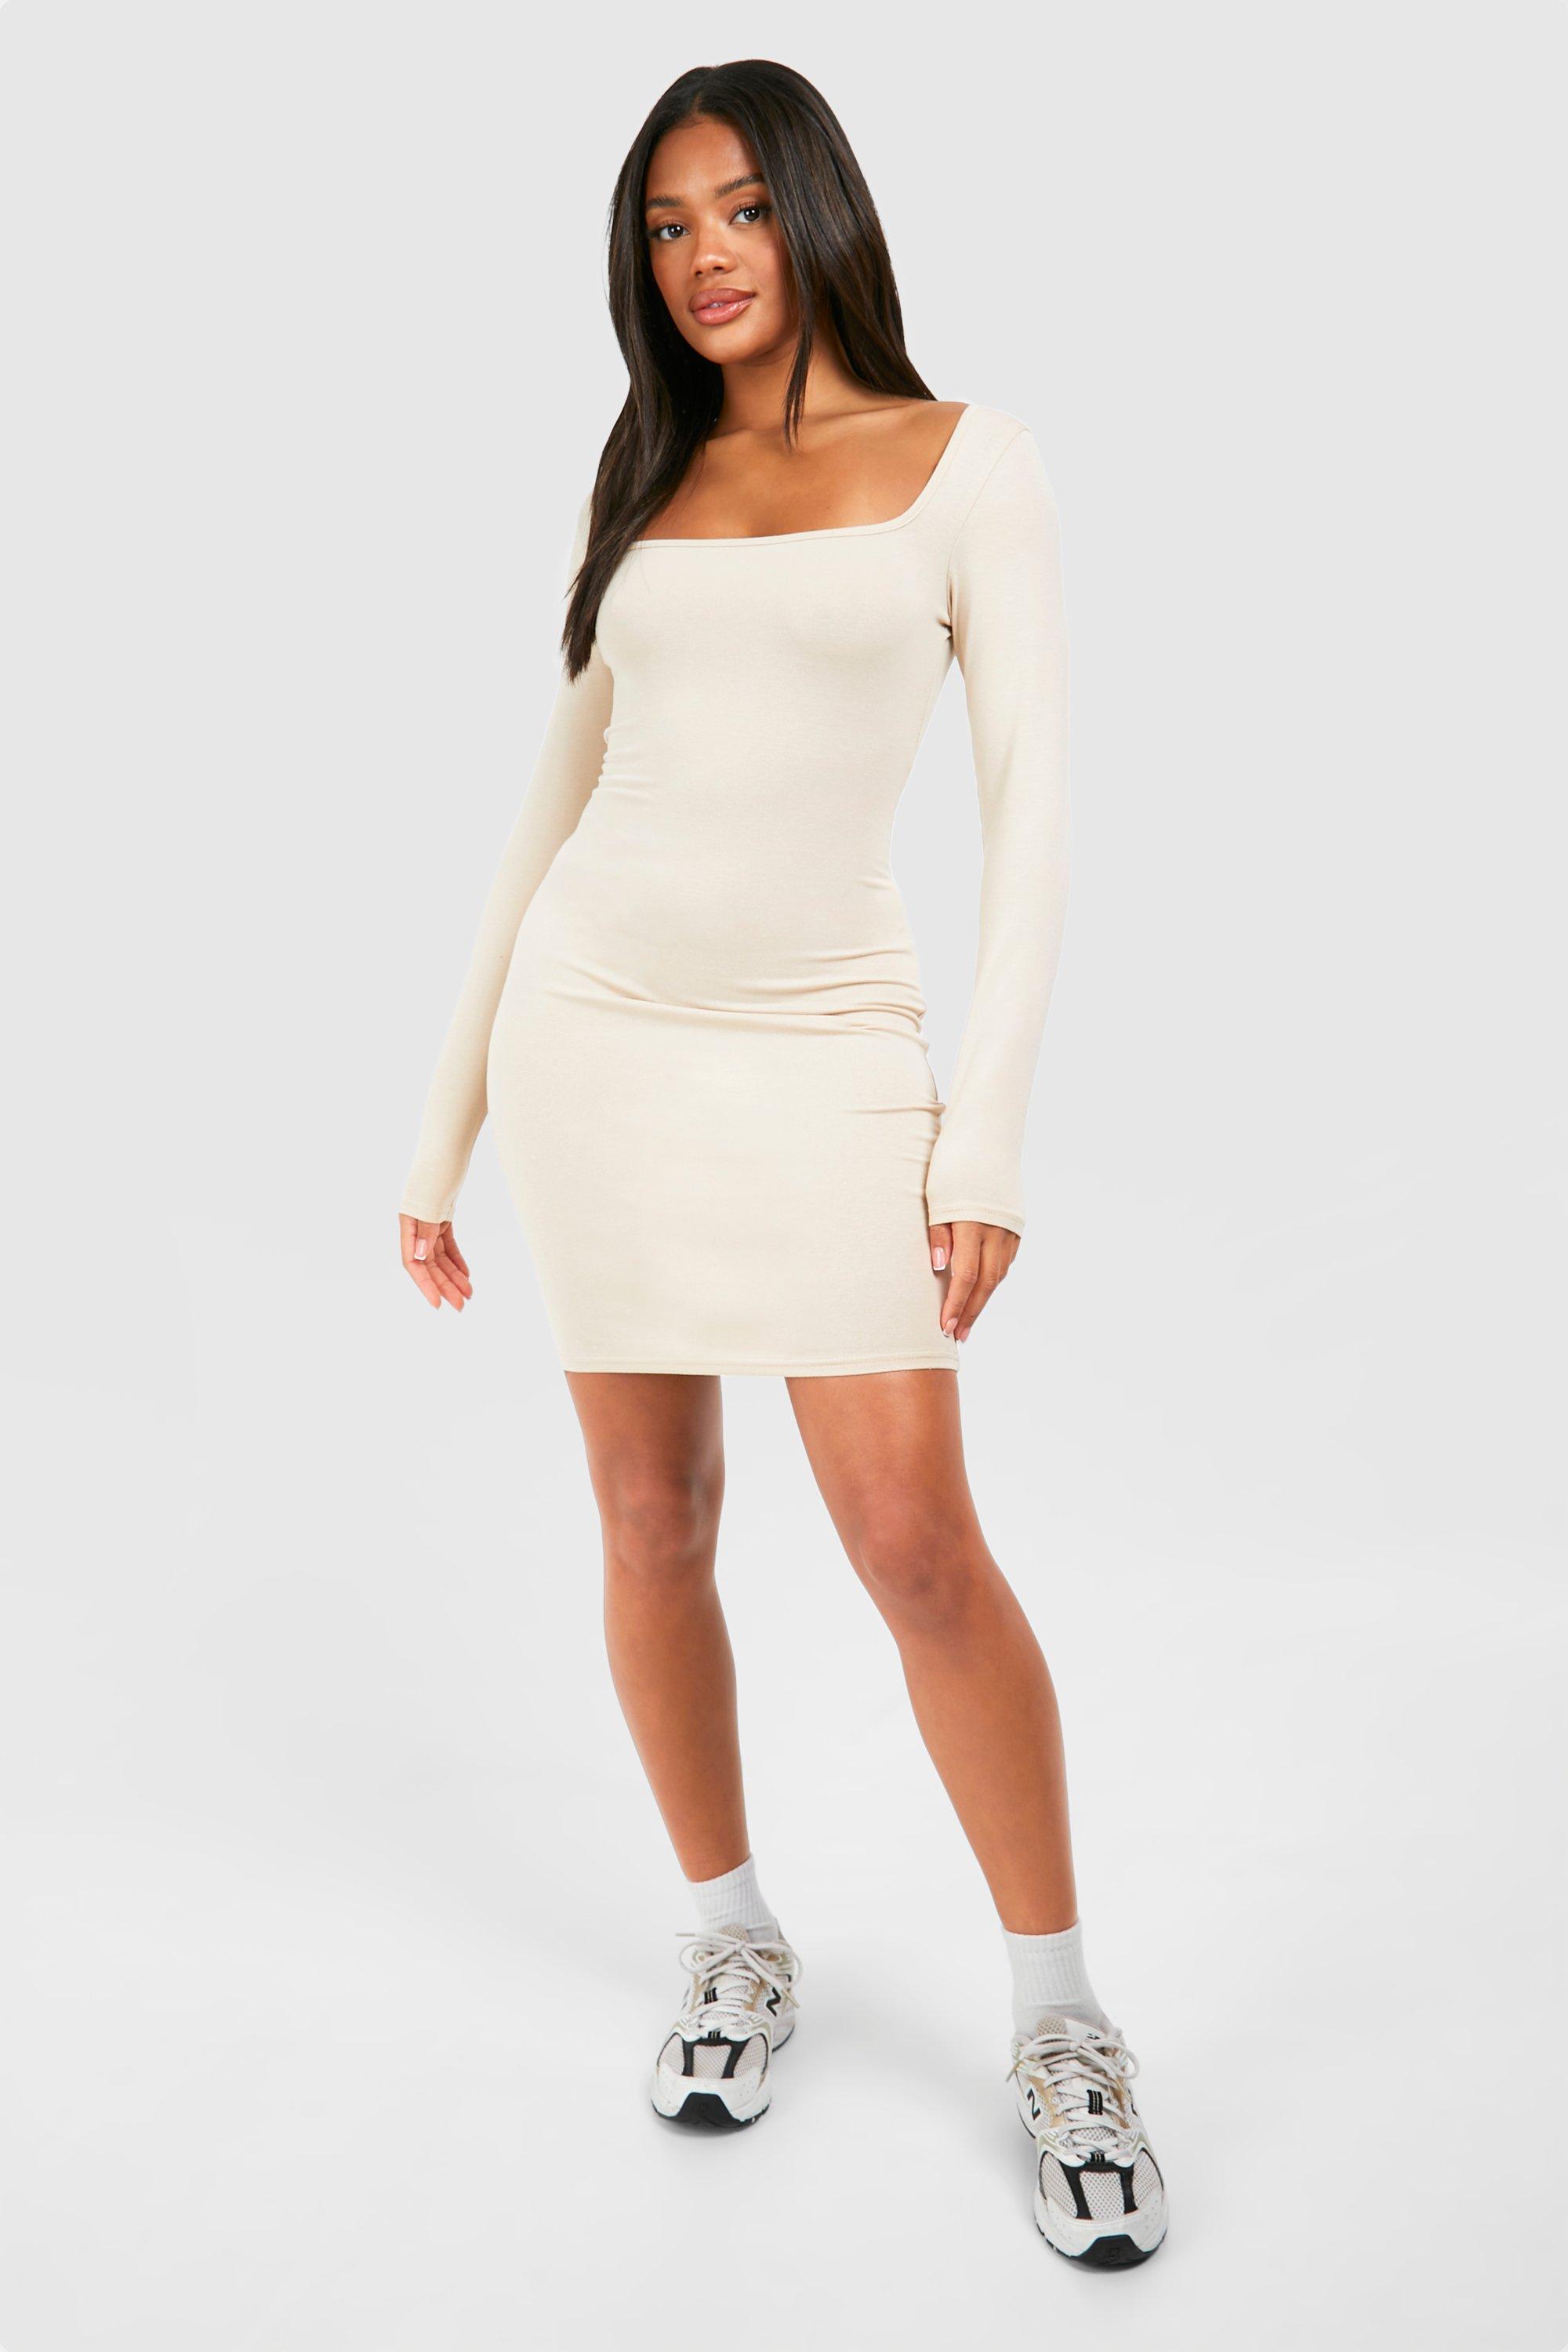 Image of Square Neck Long Sleeve Bodycon Dress, Beige